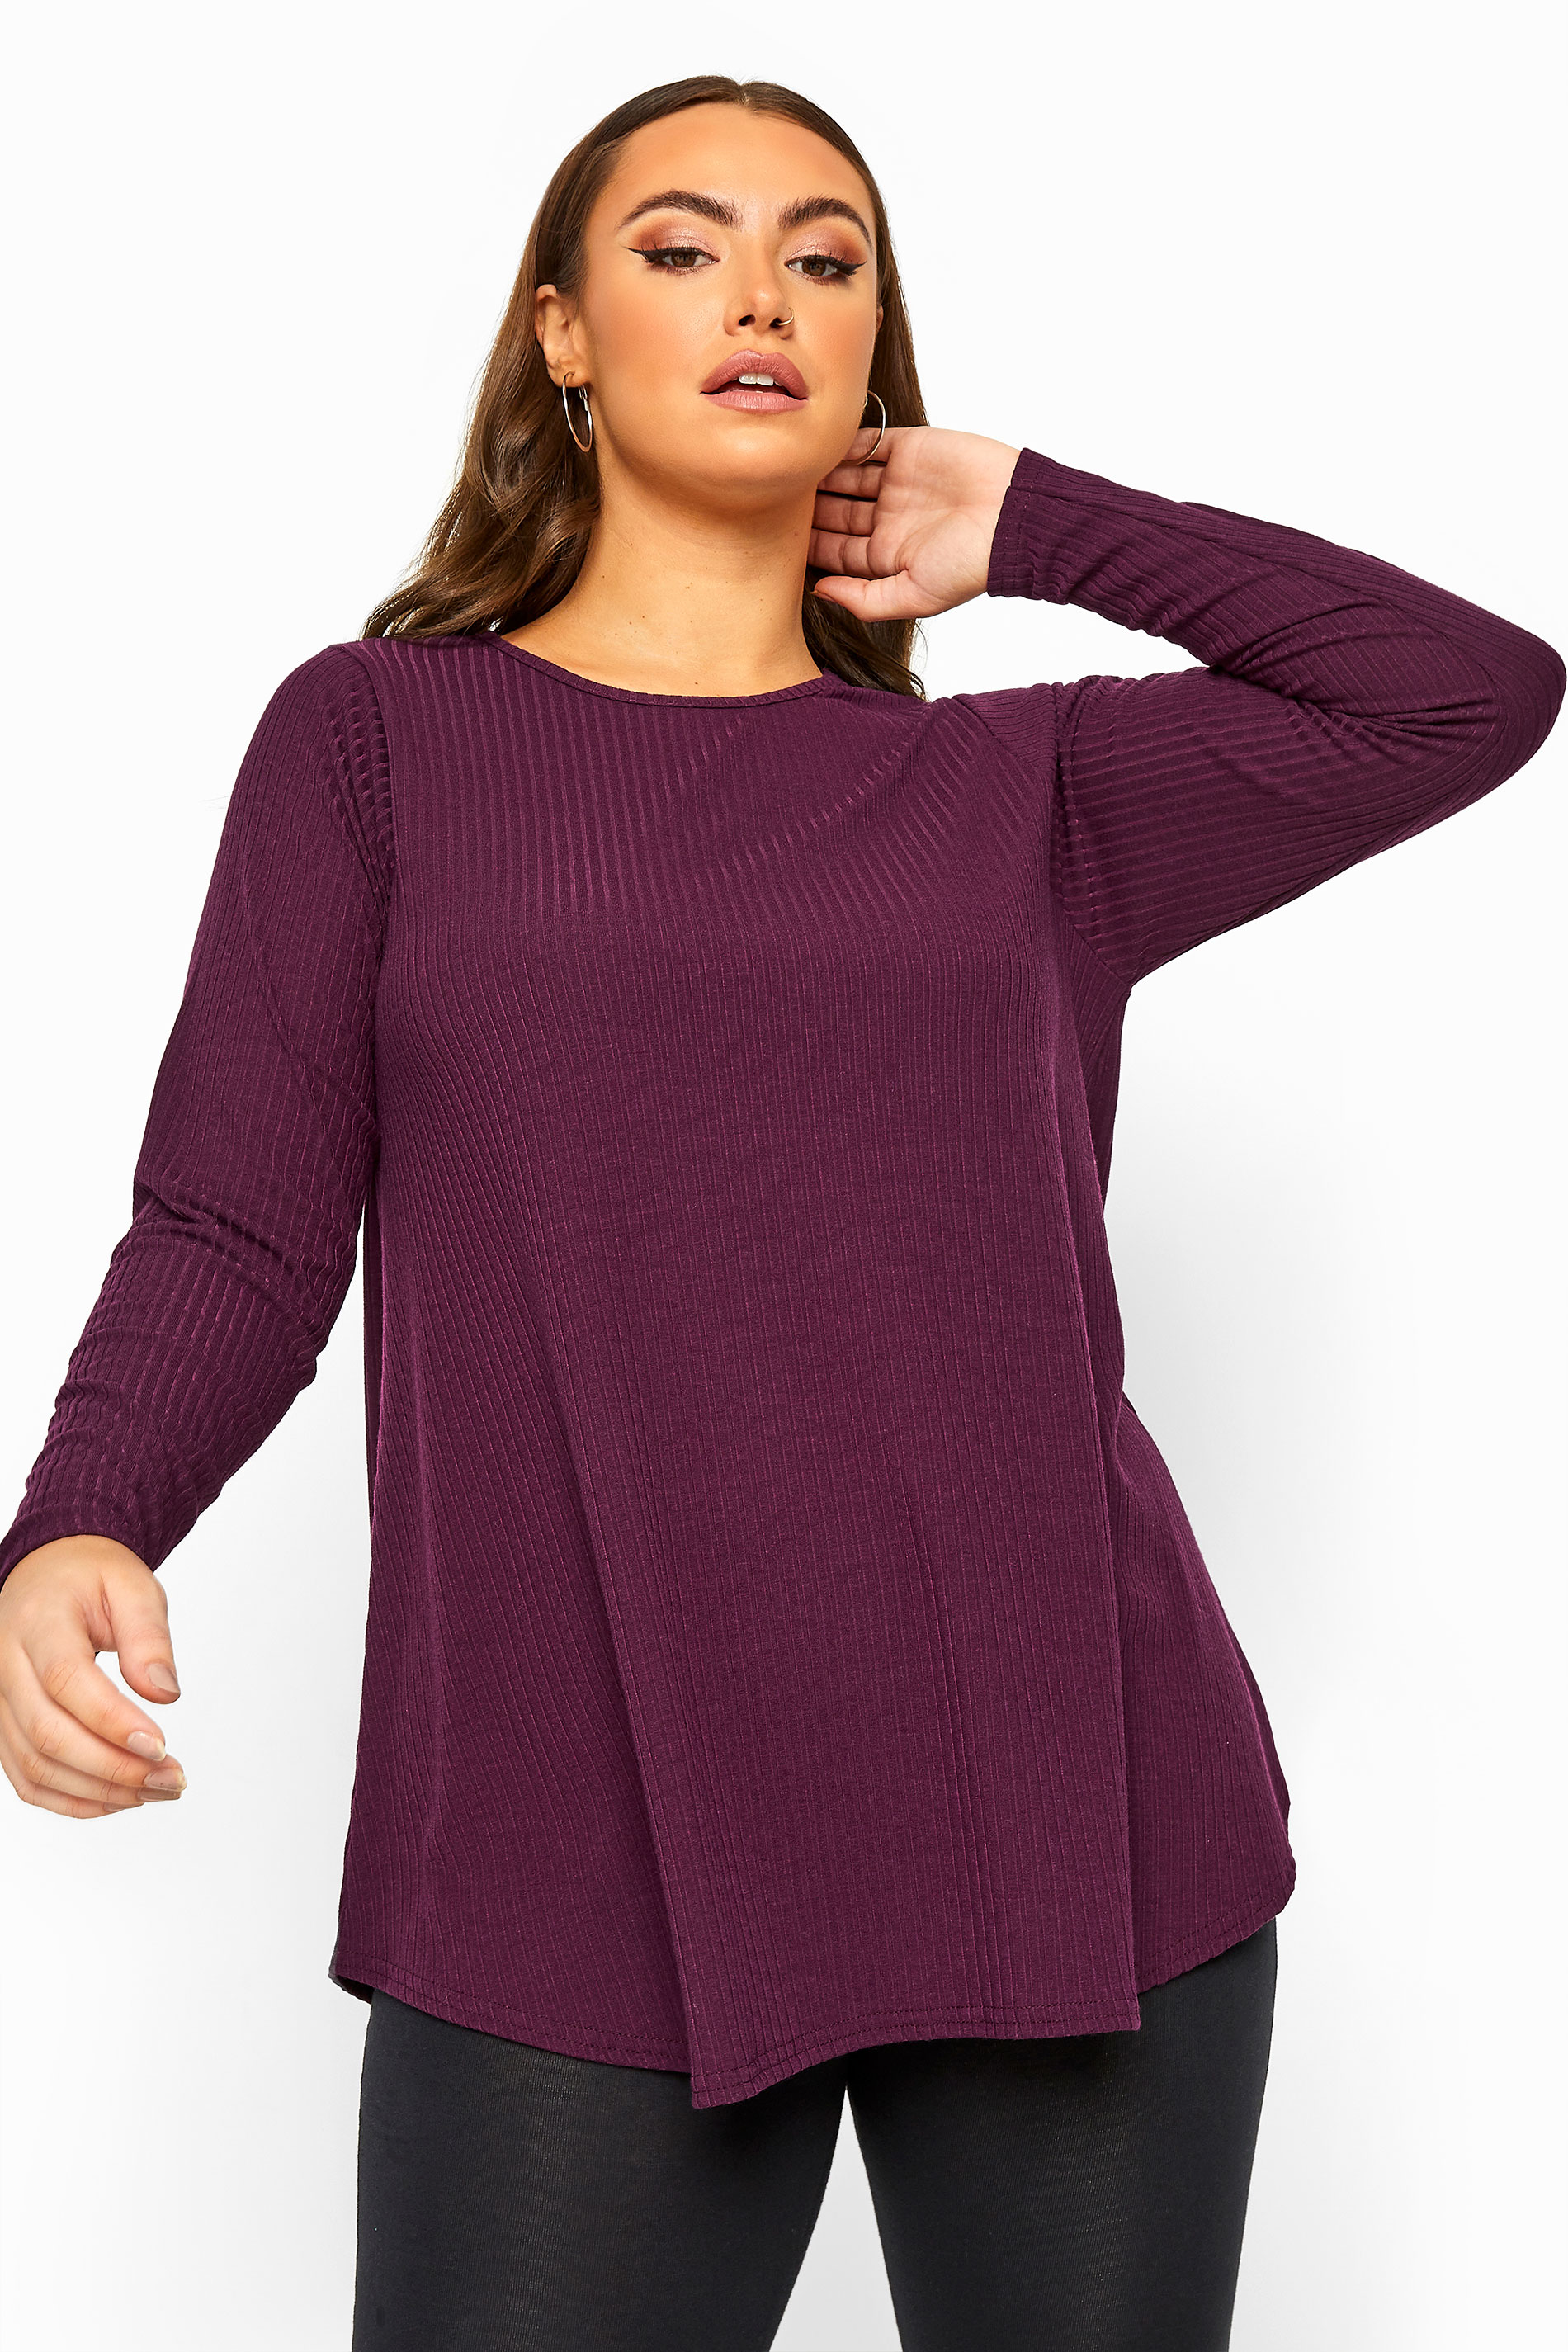 Grande taille  Tops Grande taille  Tops Jersey | LIMITED COLLECTION - Top Violet Nervuré Manches Longues - LI52350